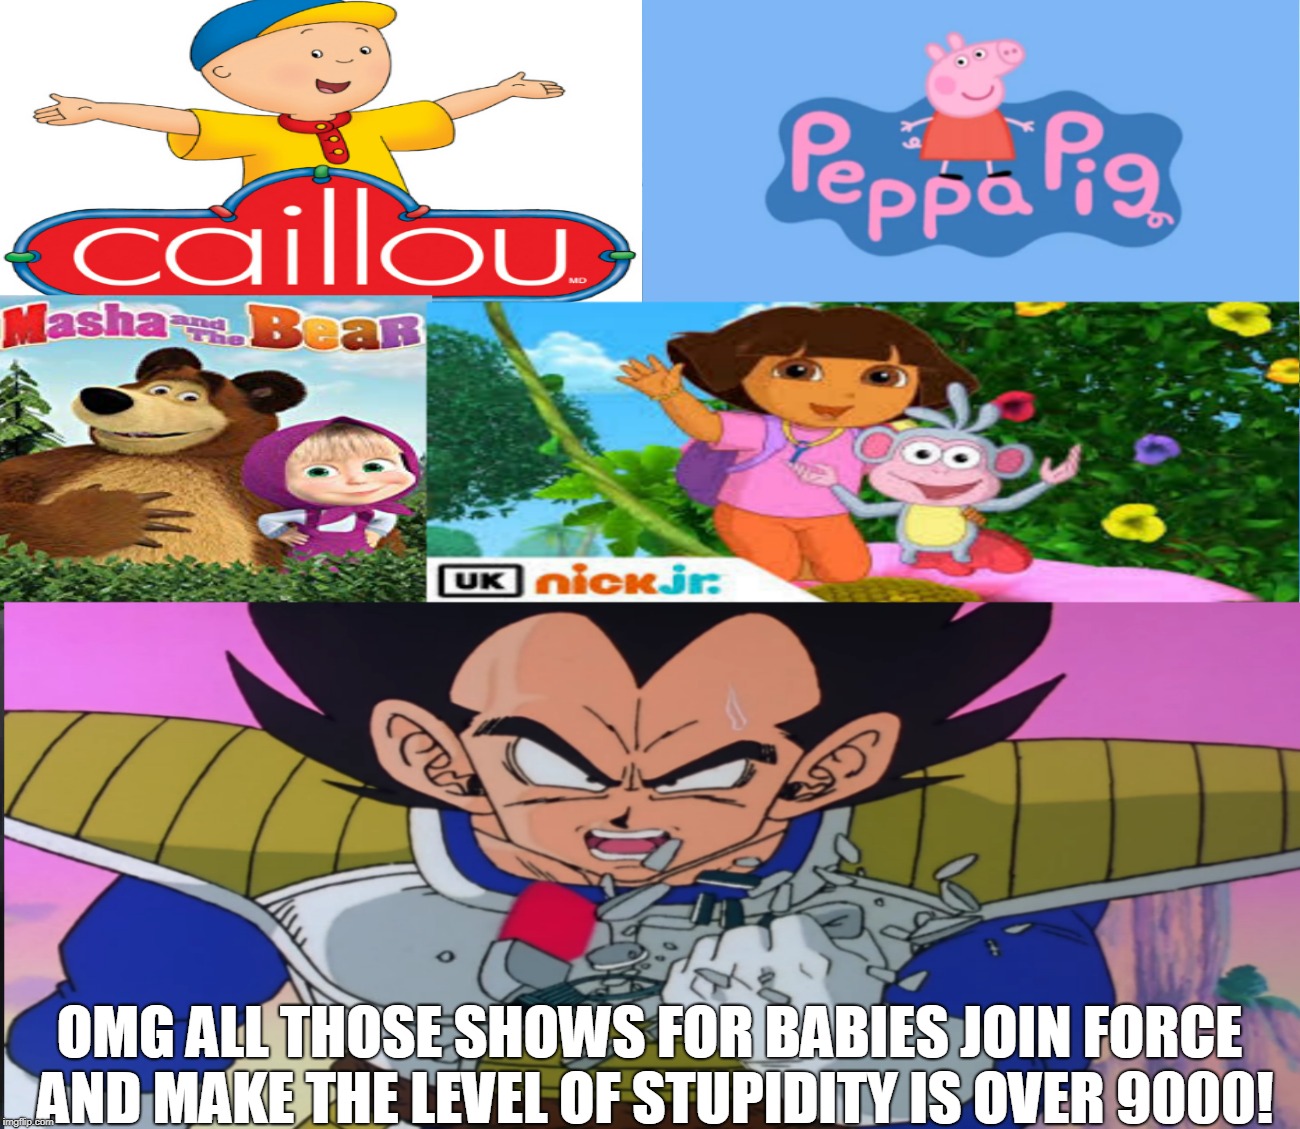 The Level Of Stupidity Is Over 9000! | OMG ALL THOSE SHOWS FOR BABIES JOIN FORCE AND MAKE THE LEVEL OF STUPIDITY IS OVER 9000! | image tagged in dragon ball z,it's over 9000,masha and the bear,dora the explorer,caillou,peppa pig | made w/ Imgflip meme maker